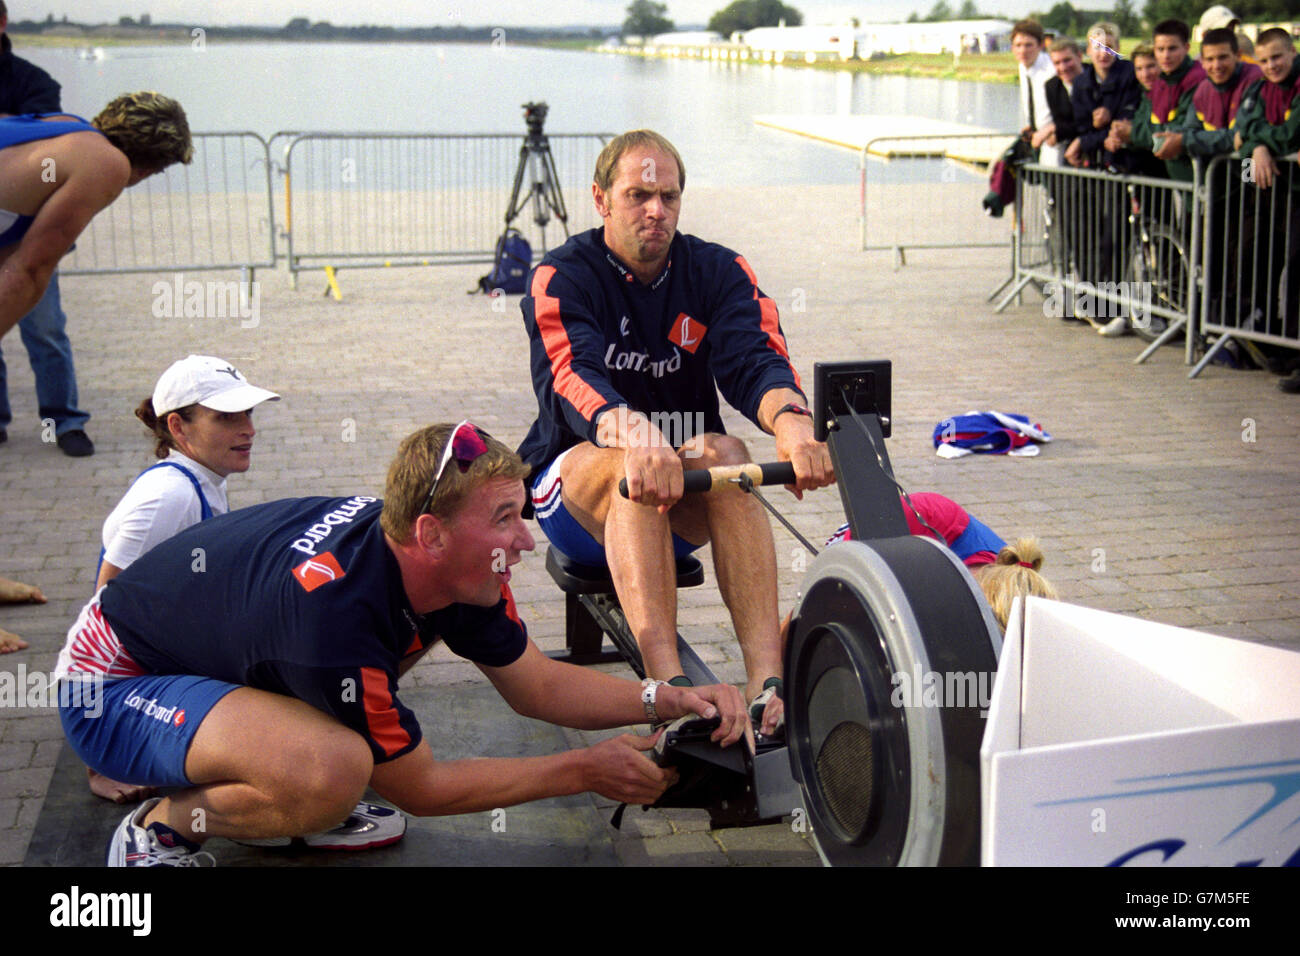 Rowing - Supersprint Rowing Grand Prix - Steven Redgrave Photocall. Steve Redgrave on a rowing machine. Stock Photo